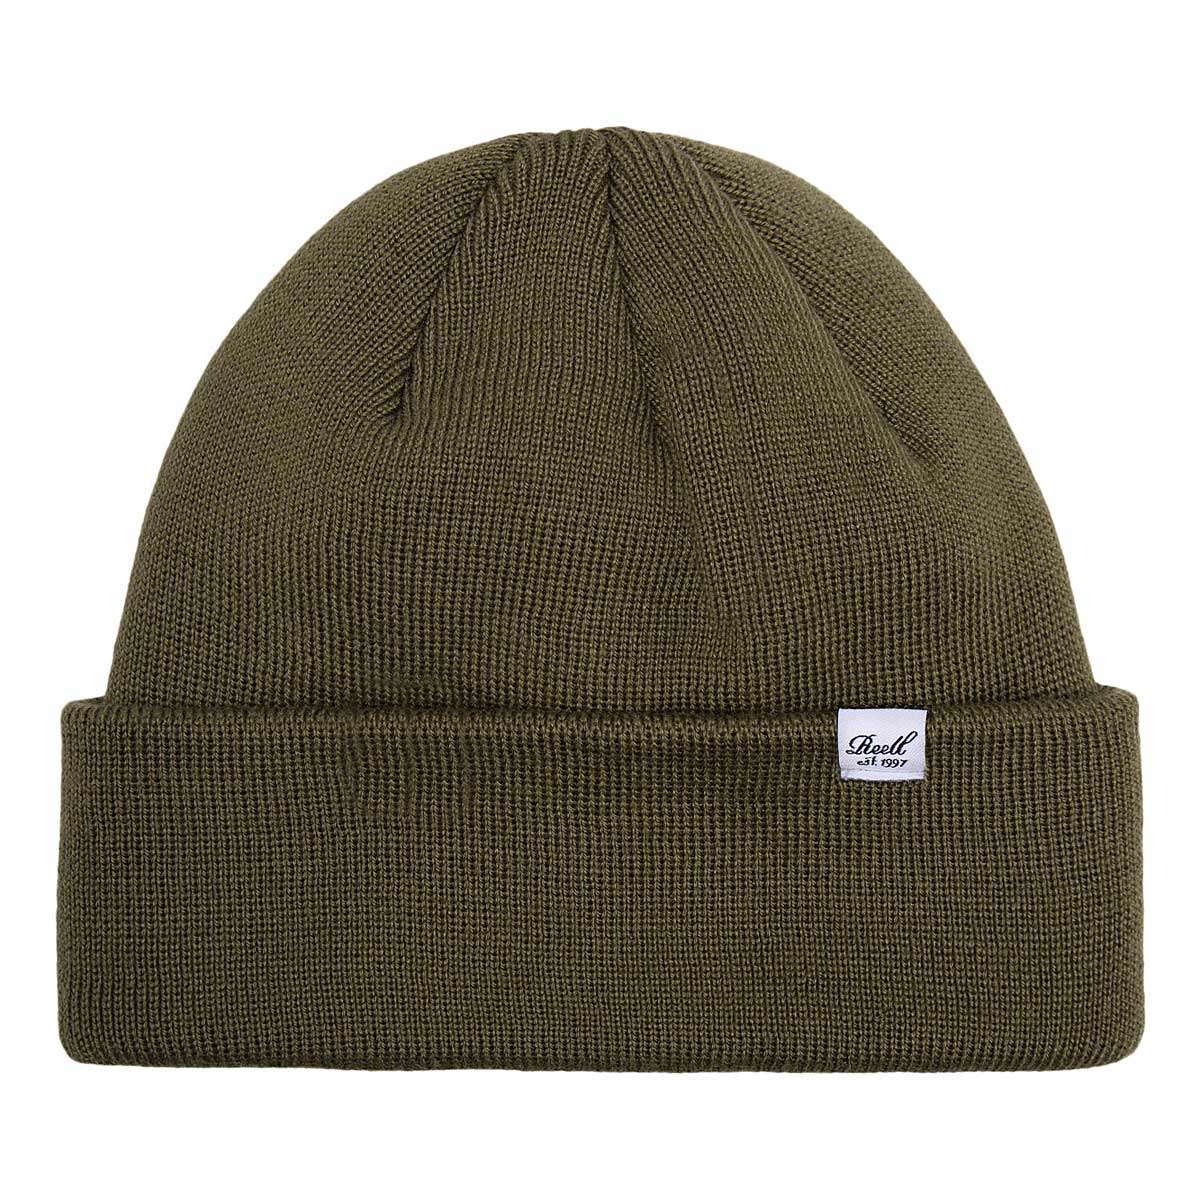 Reell Beanie, Olive